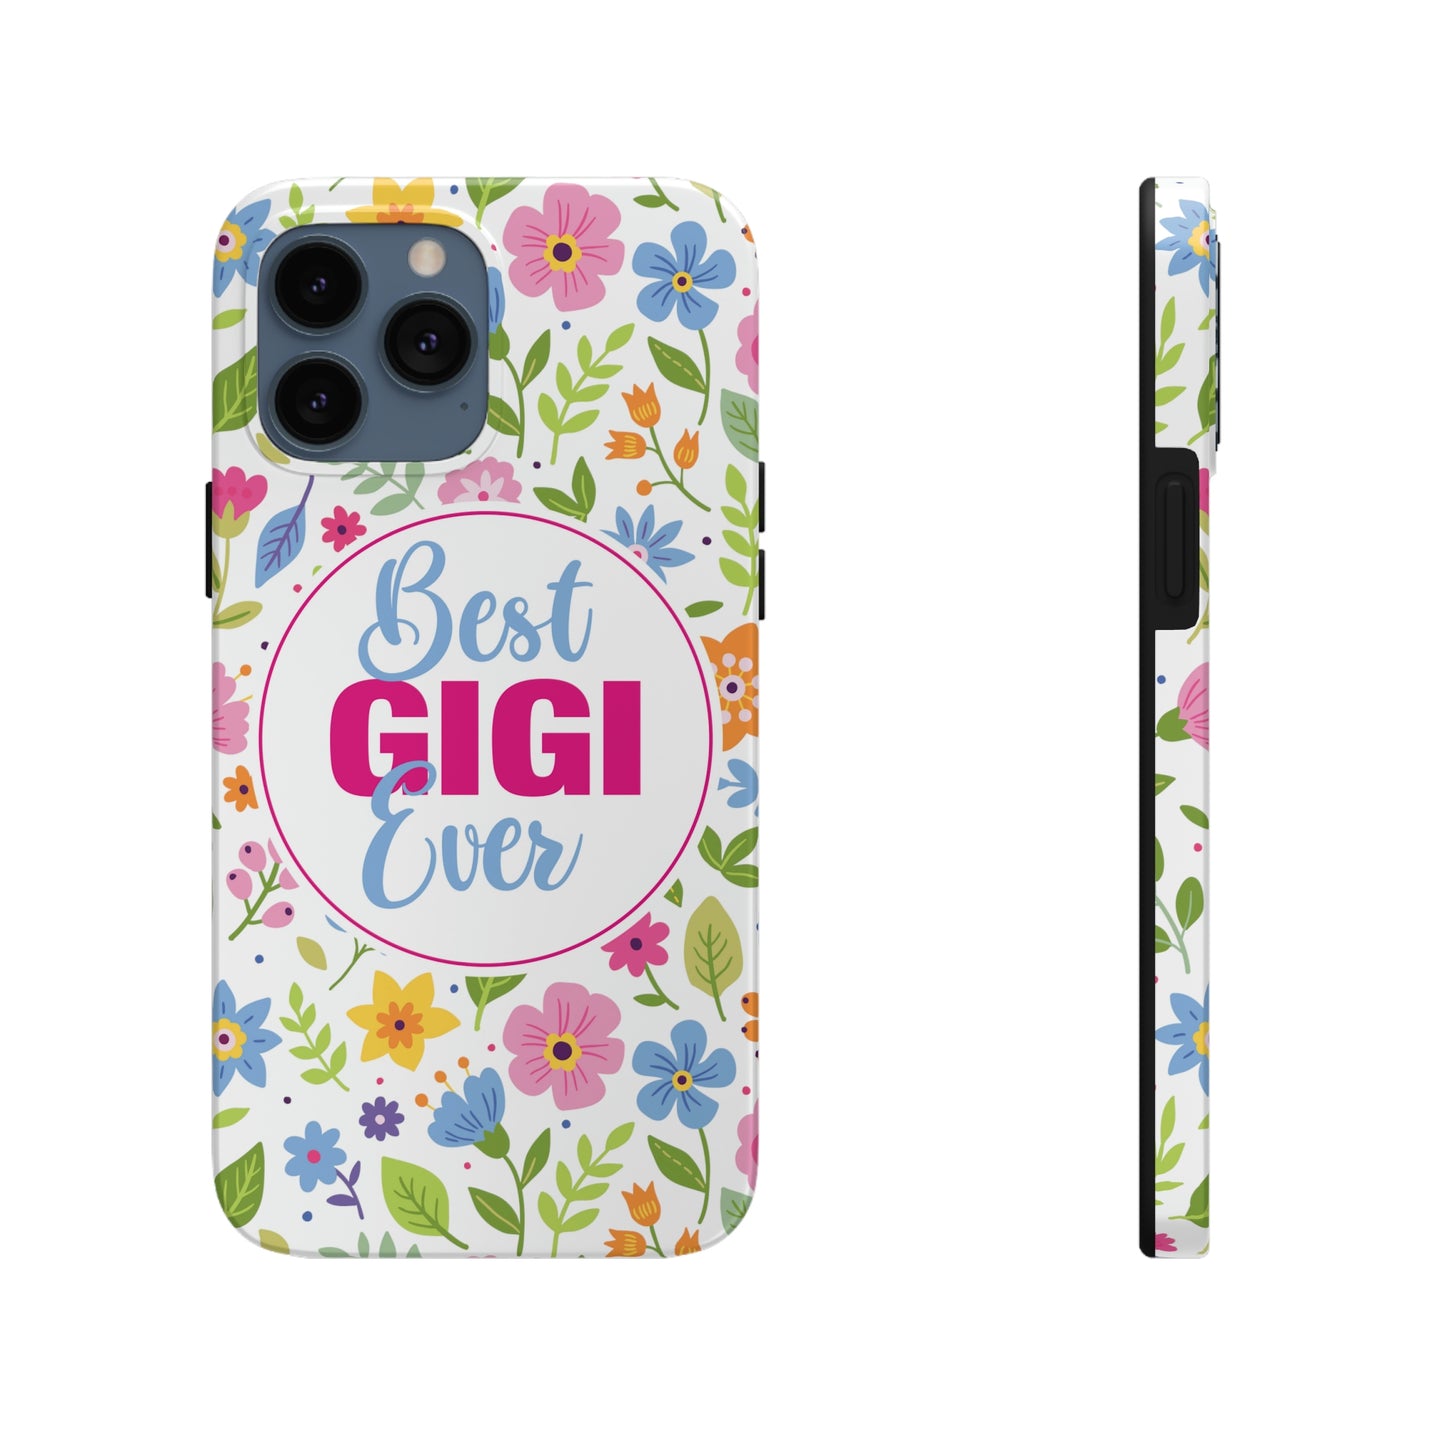 Best GiGi Ever Tough iPhone Cases by Case-Mate, Mothers Day Gift